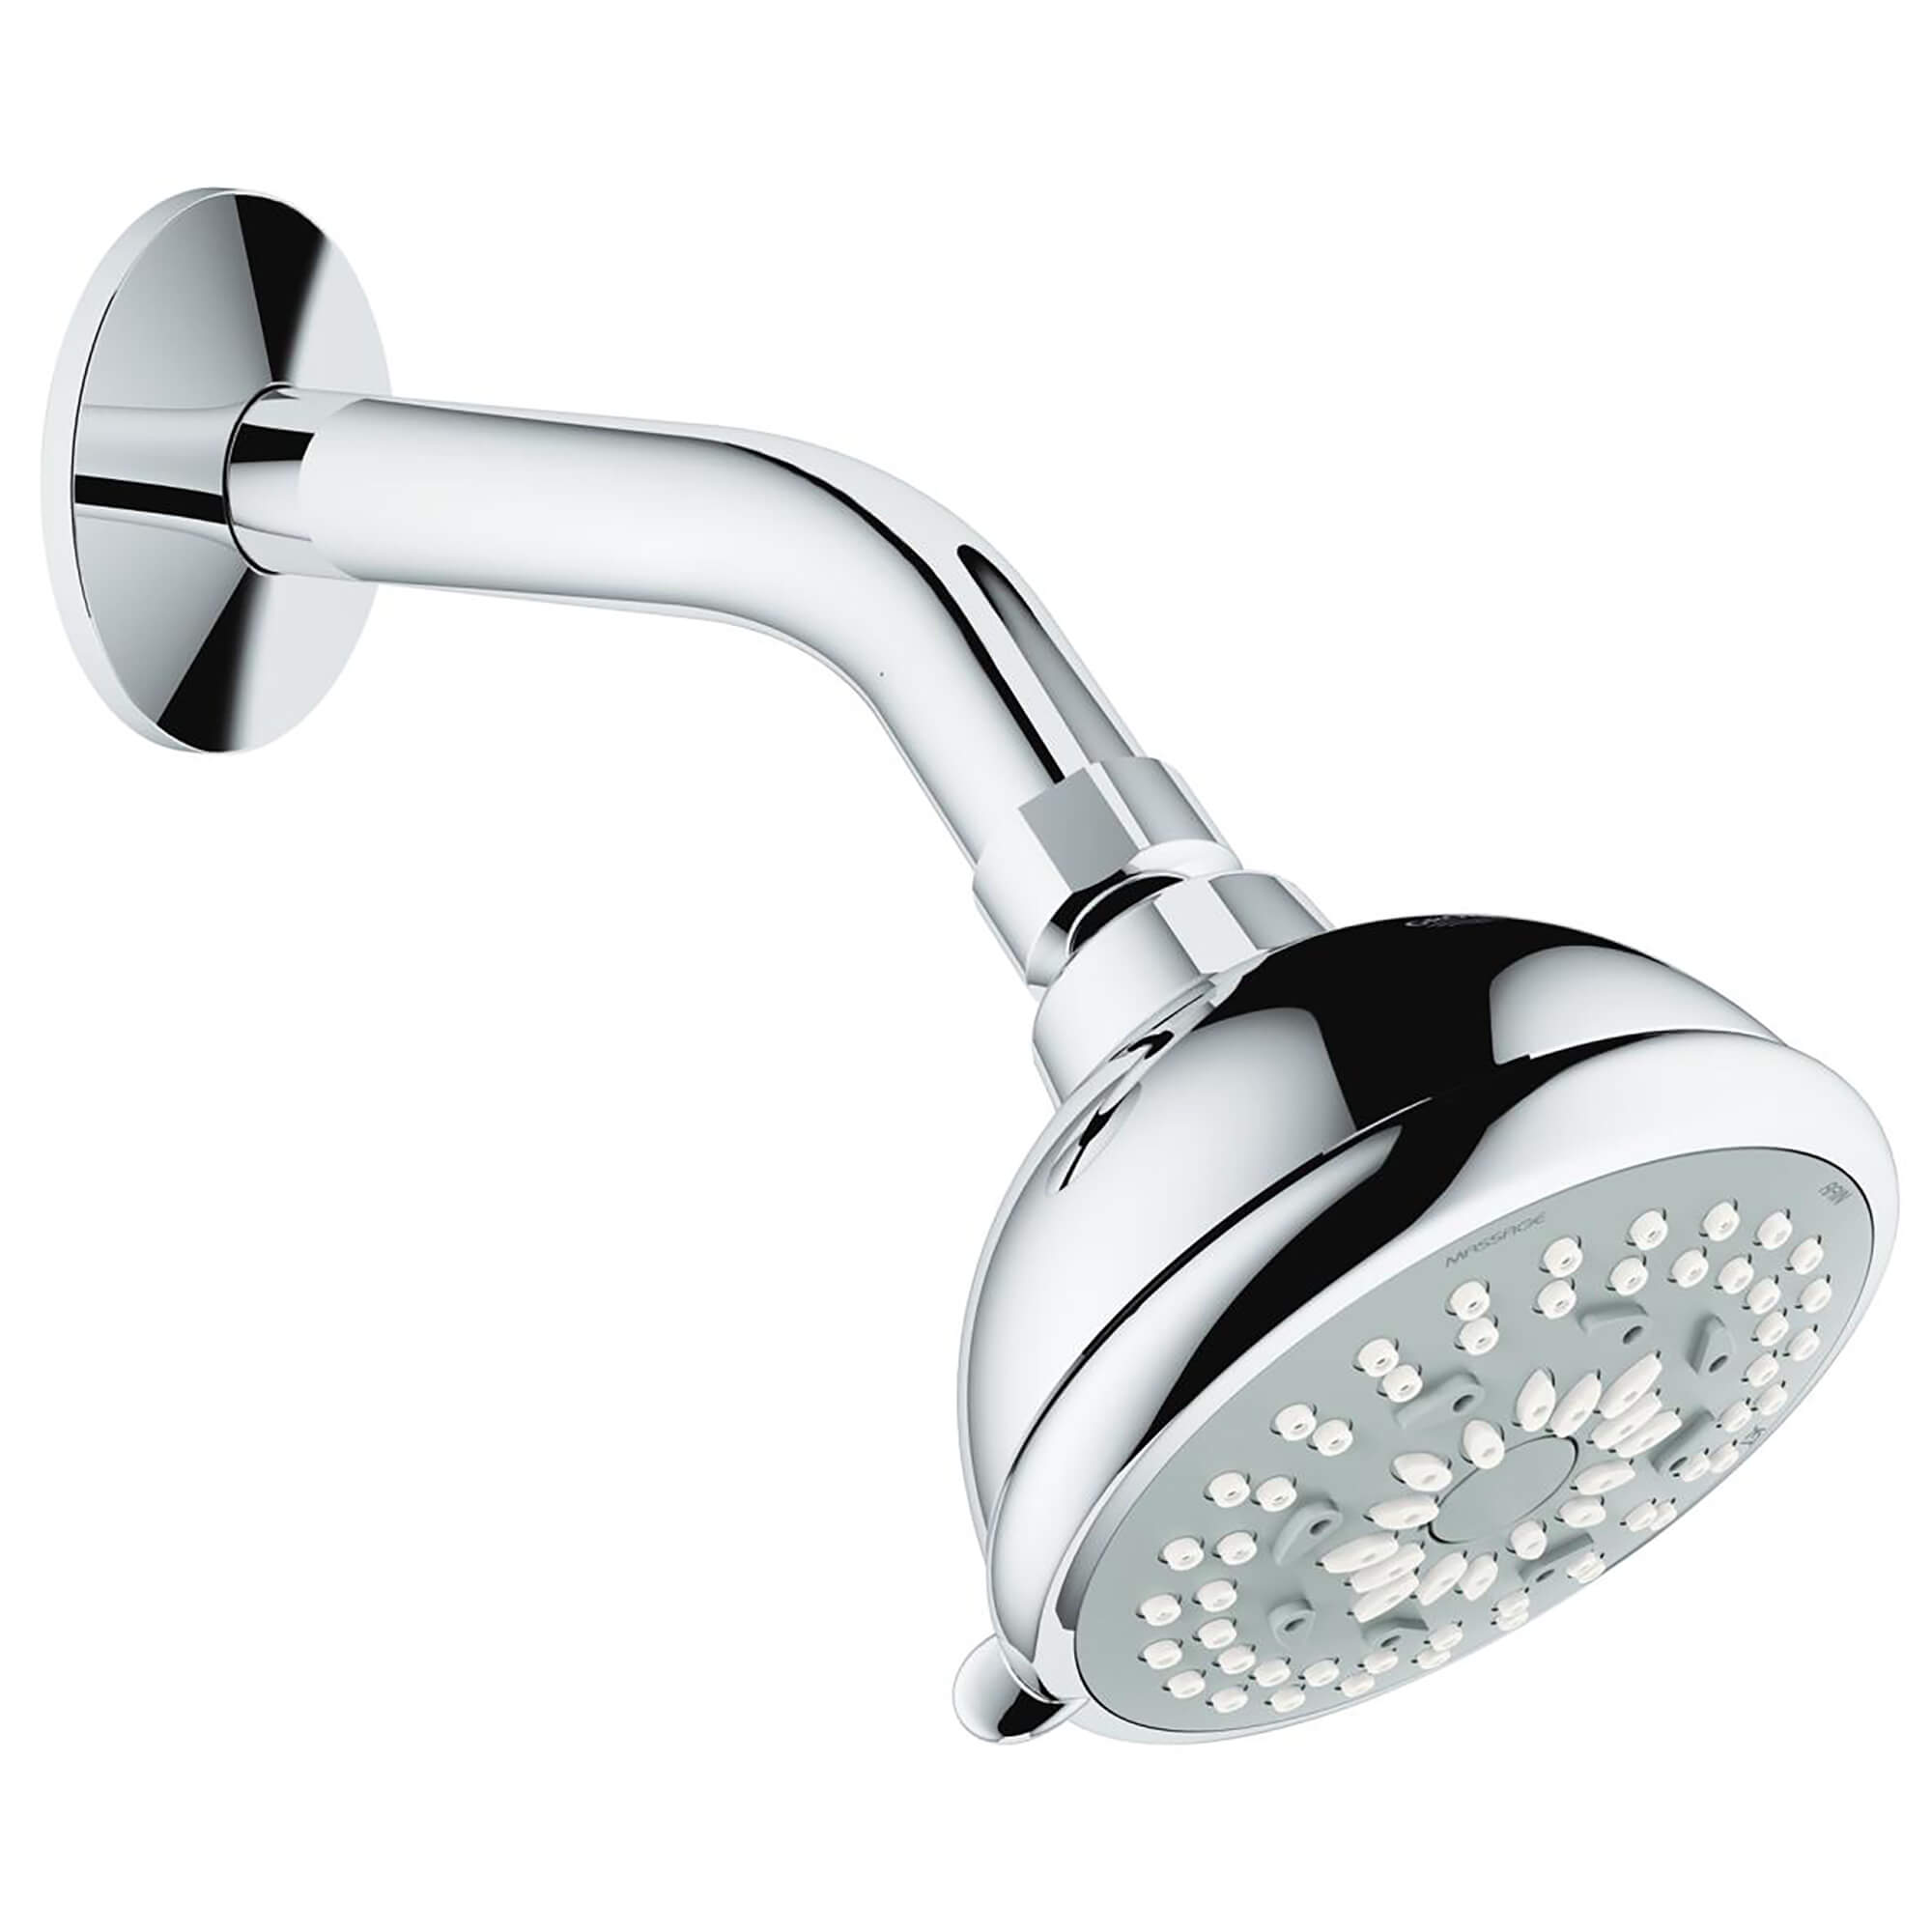 90 SHOWER HEAD WITH SHOWER ARM, 3-1/2" - 3 SPRAYS, 2.5 GPM-related